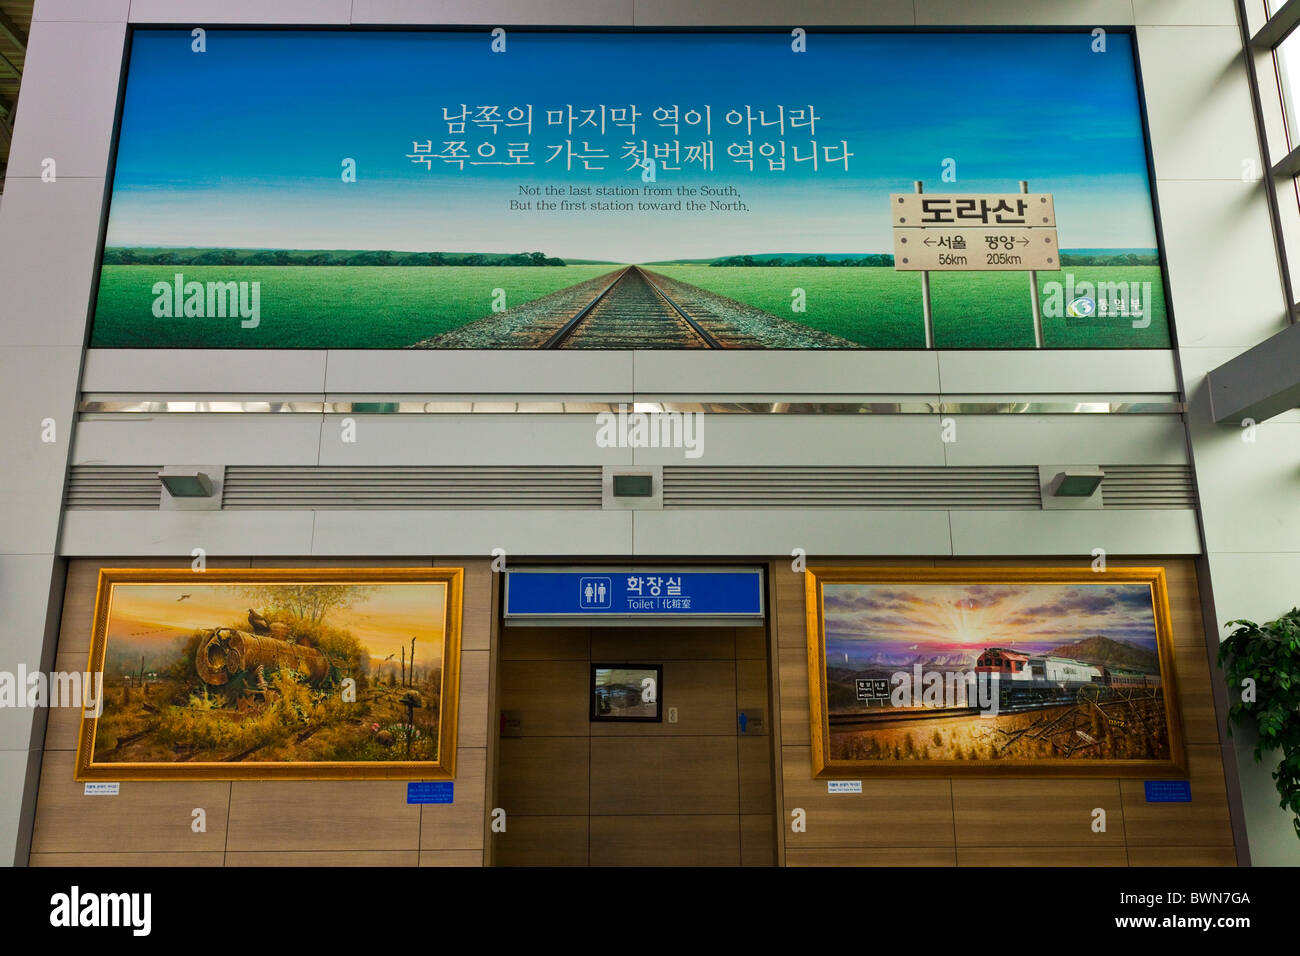 Dorasan railway Station in the DMZ Demilitarized Zone on the Gyeongui Line between South and North Korea. JMH3815 Stock Photo